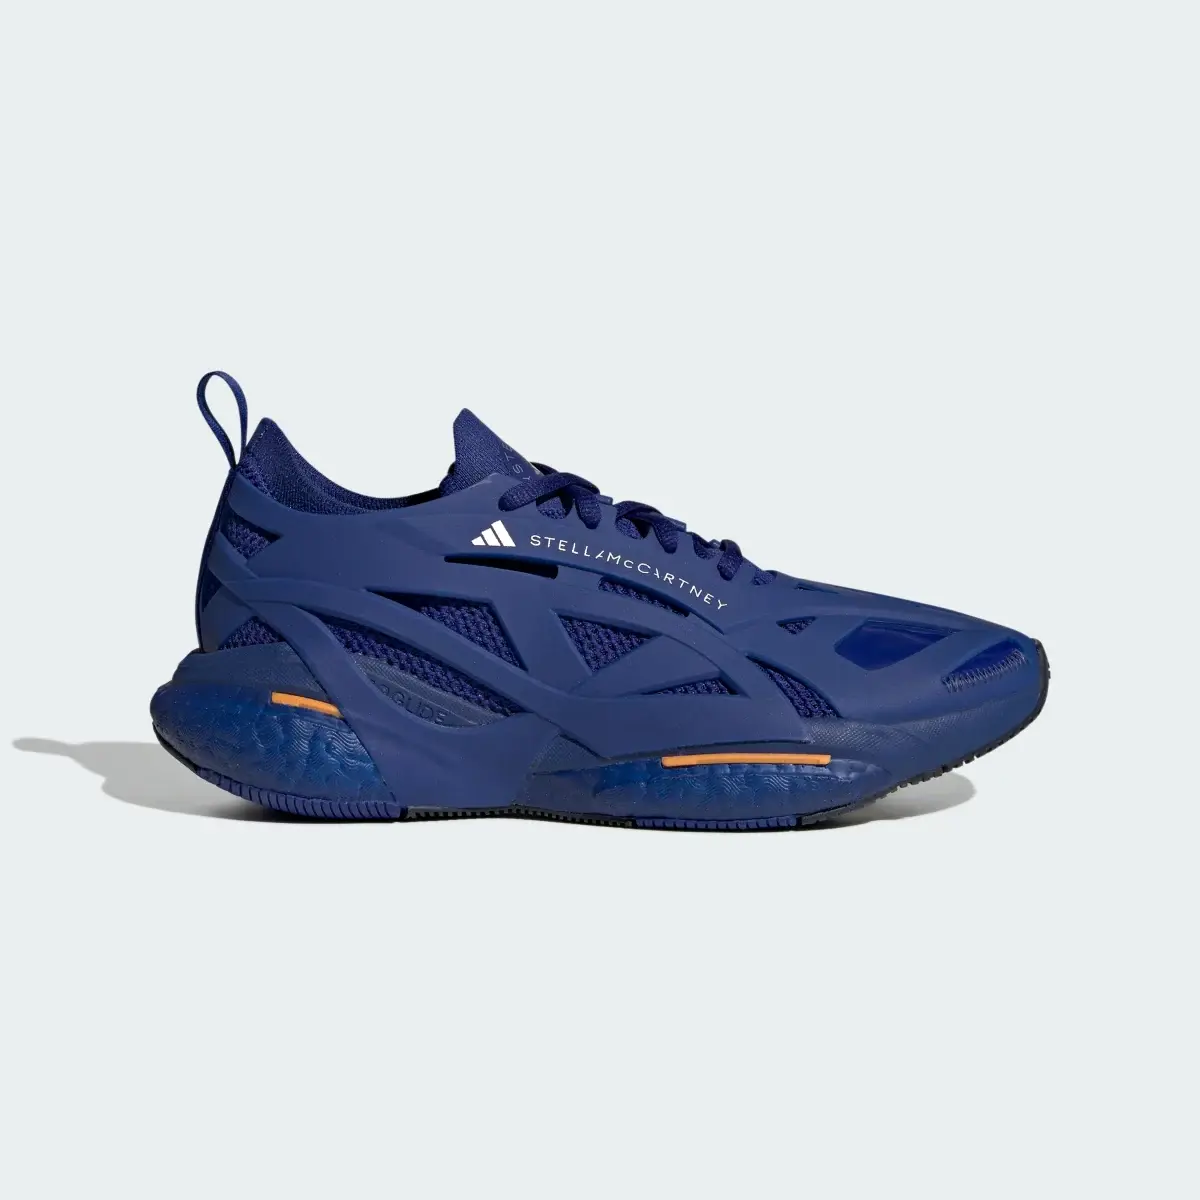 Adidas by Stella McCartney Solarglide Shoes. 2